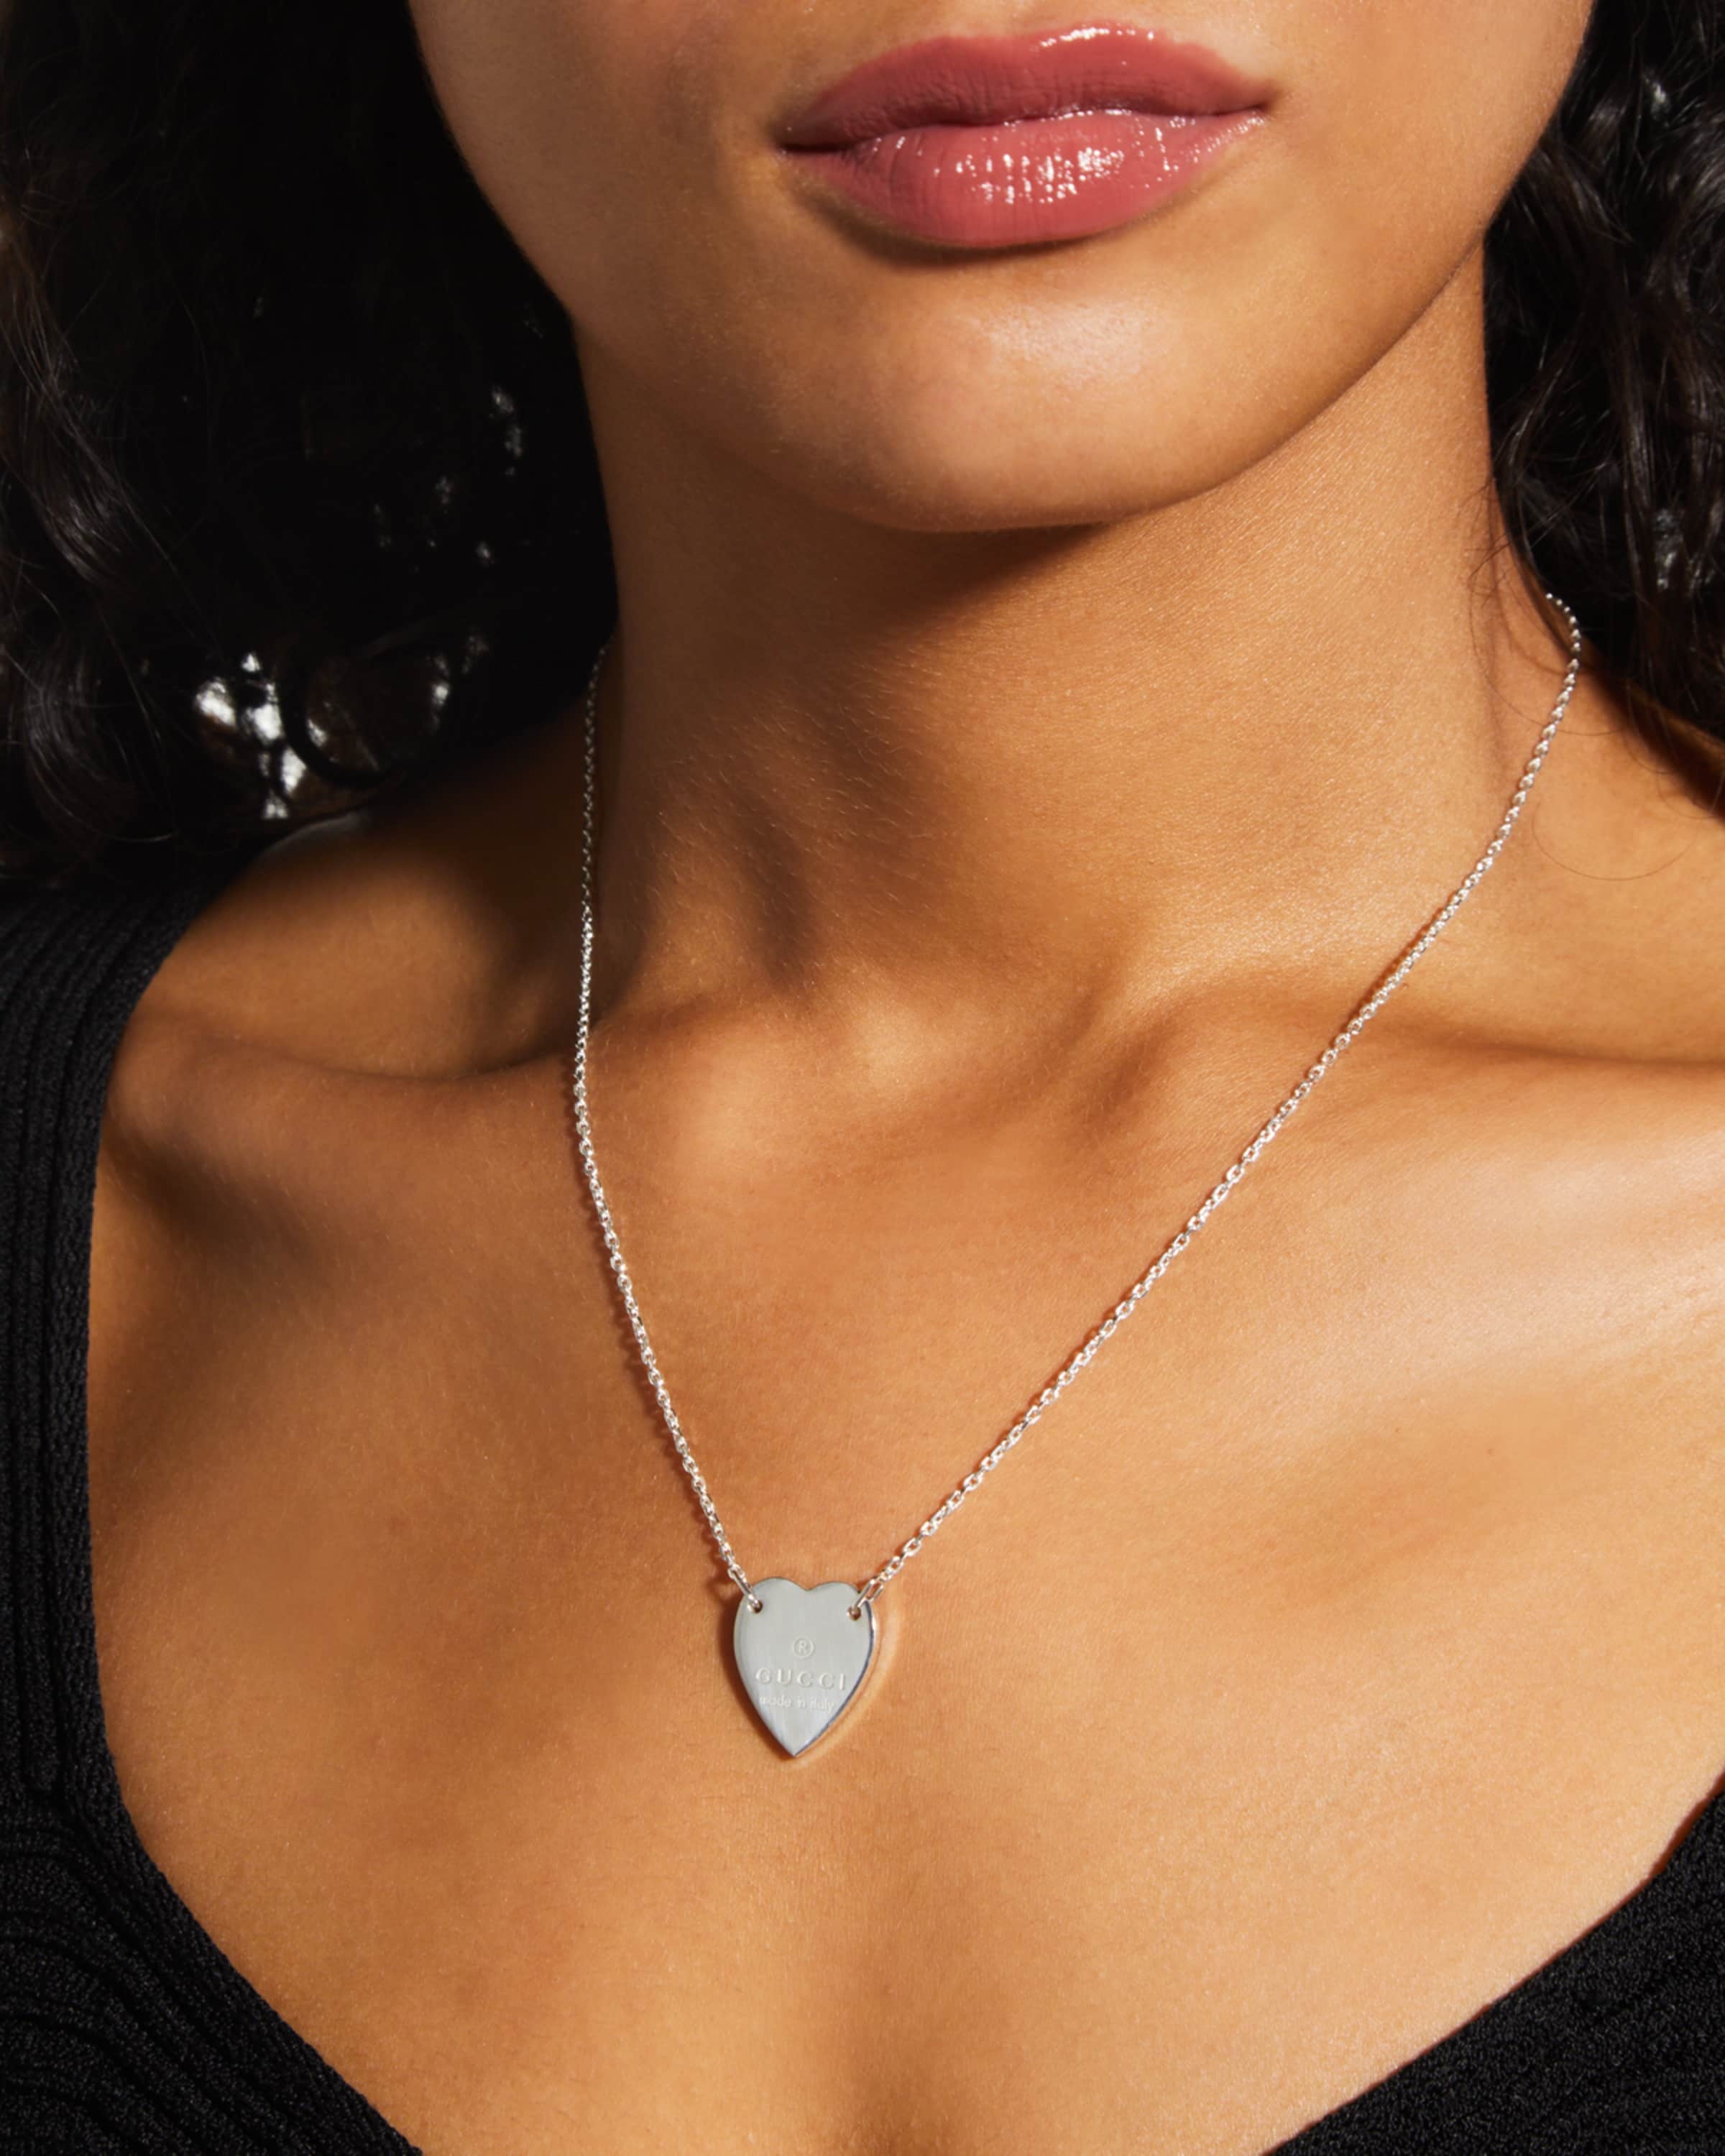 Engraved Heart Trademark Necklace - 2